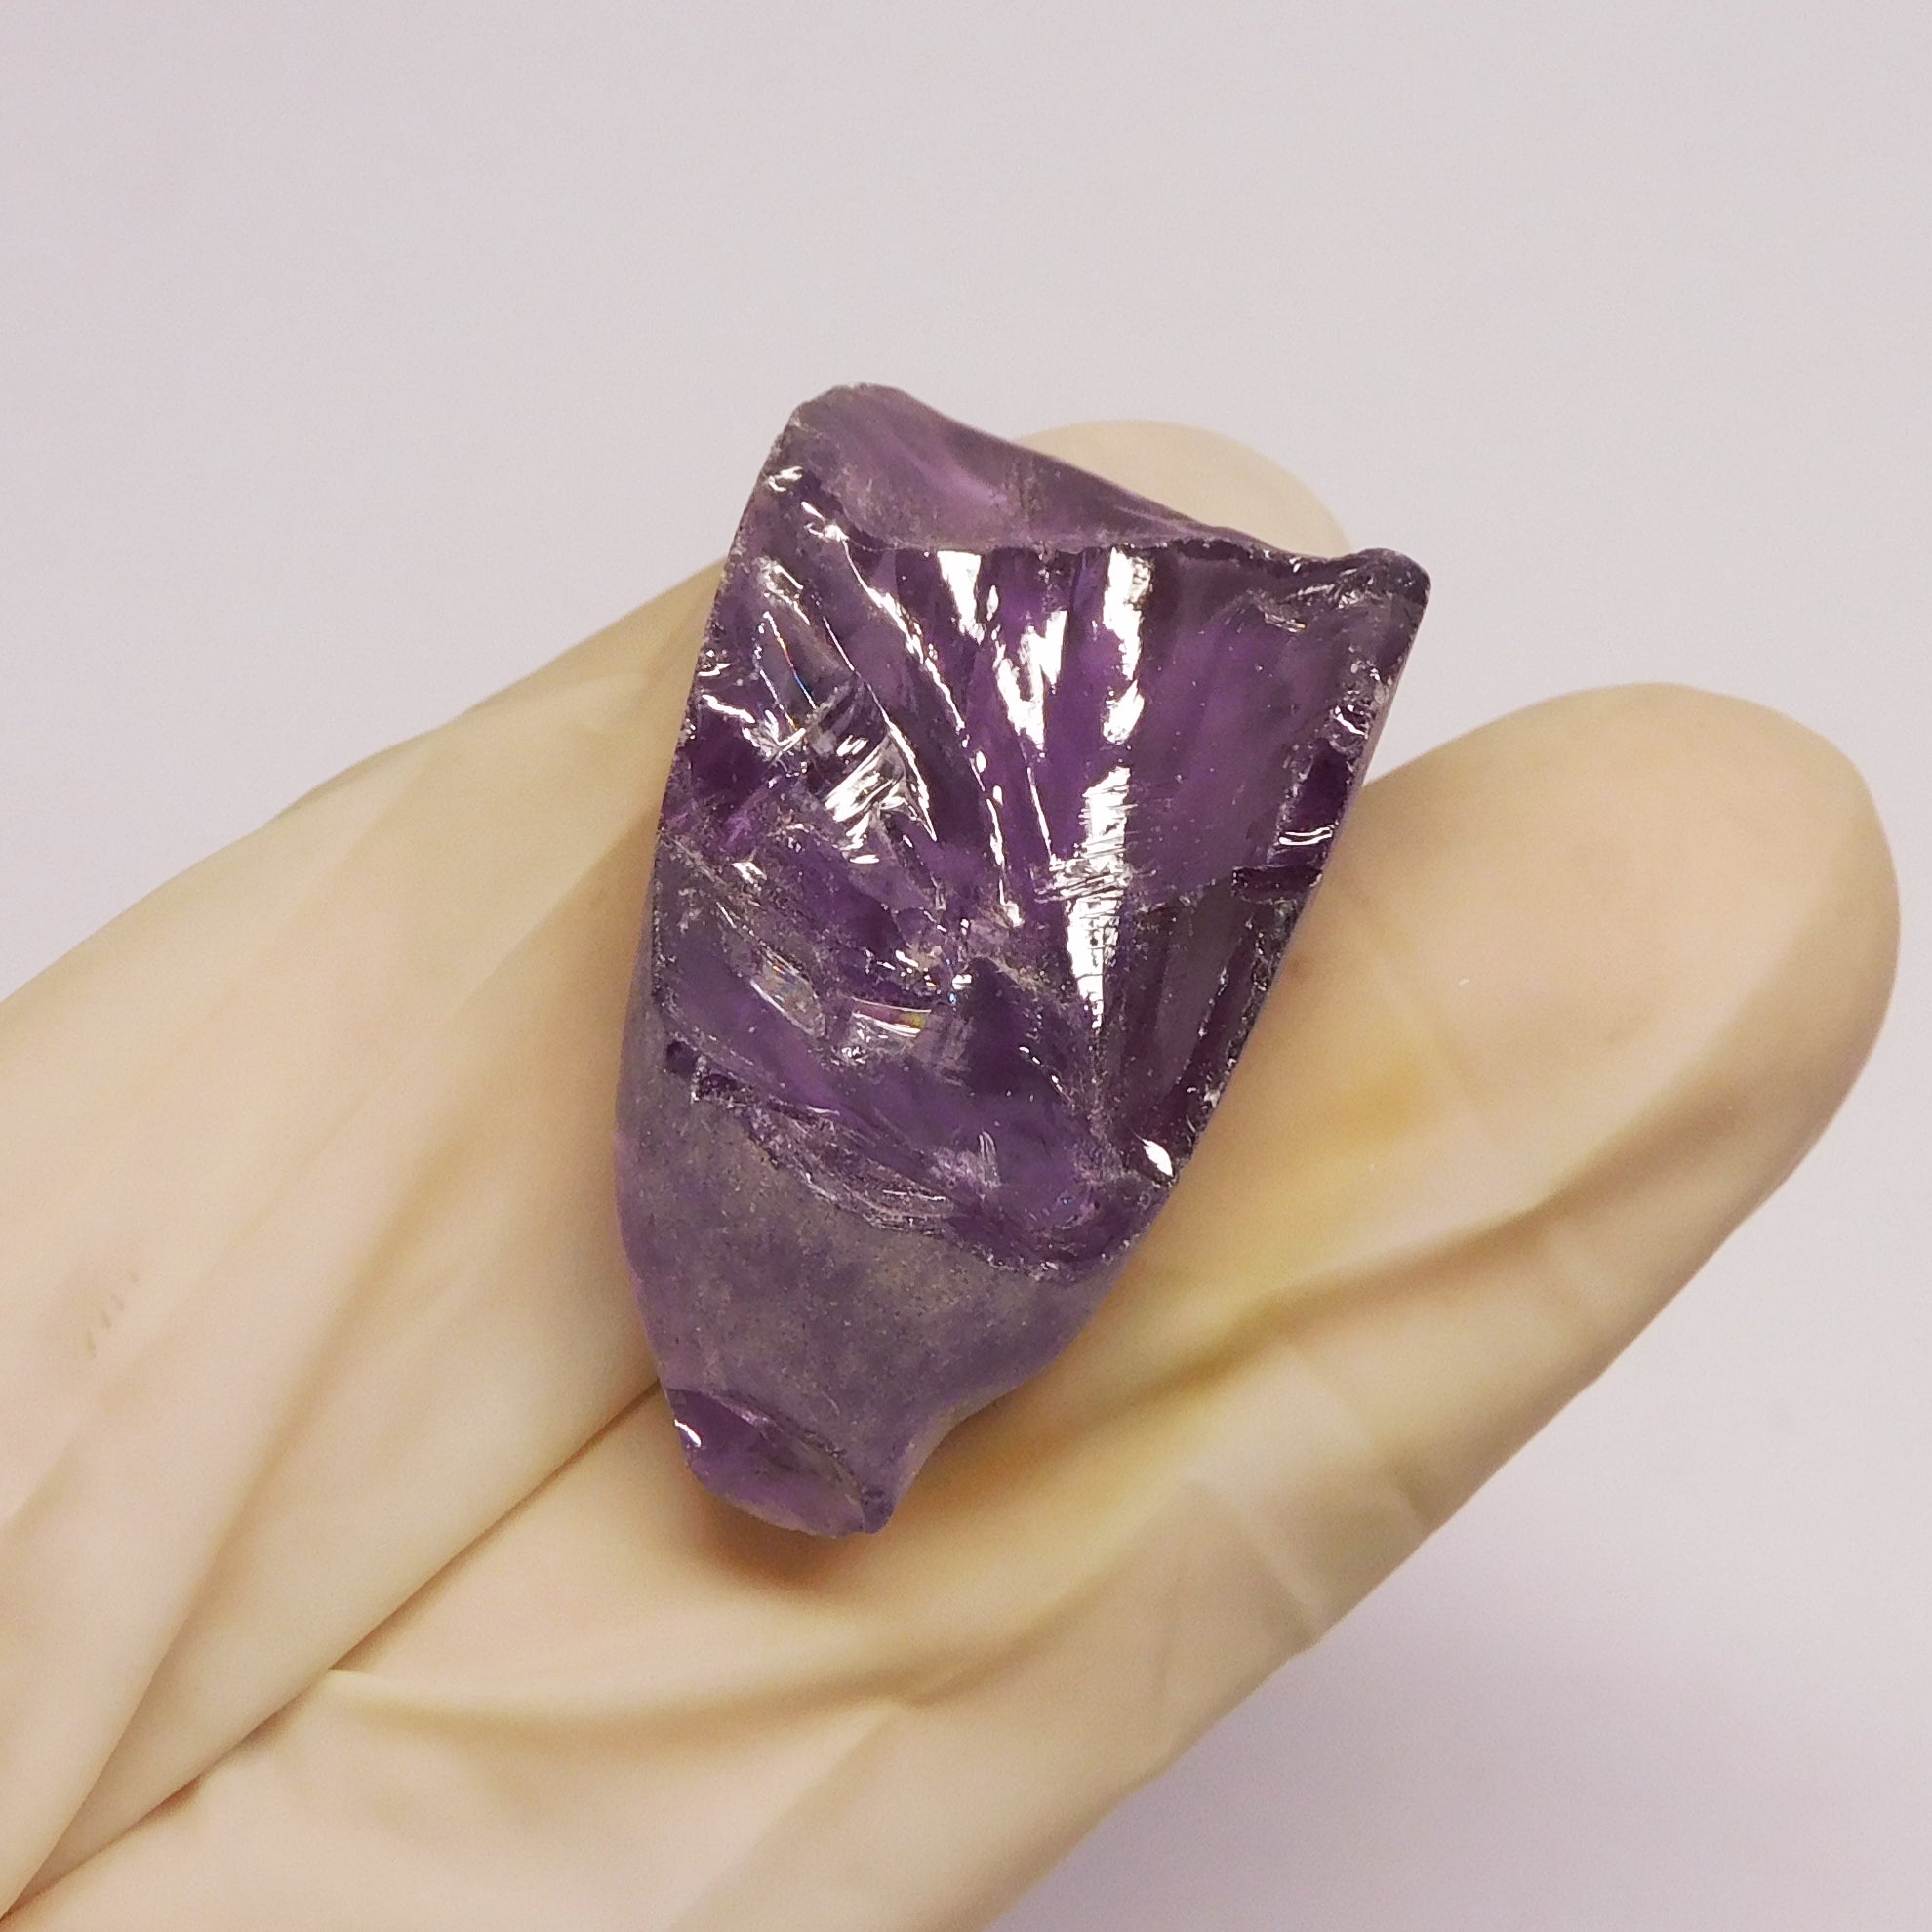 Excellent Cut !! Free Shipping Free Gift !! Natural Color Change Alexandrite 57.05 Carat Raw CERTIFIED Uncut Rough Loose Gemstone